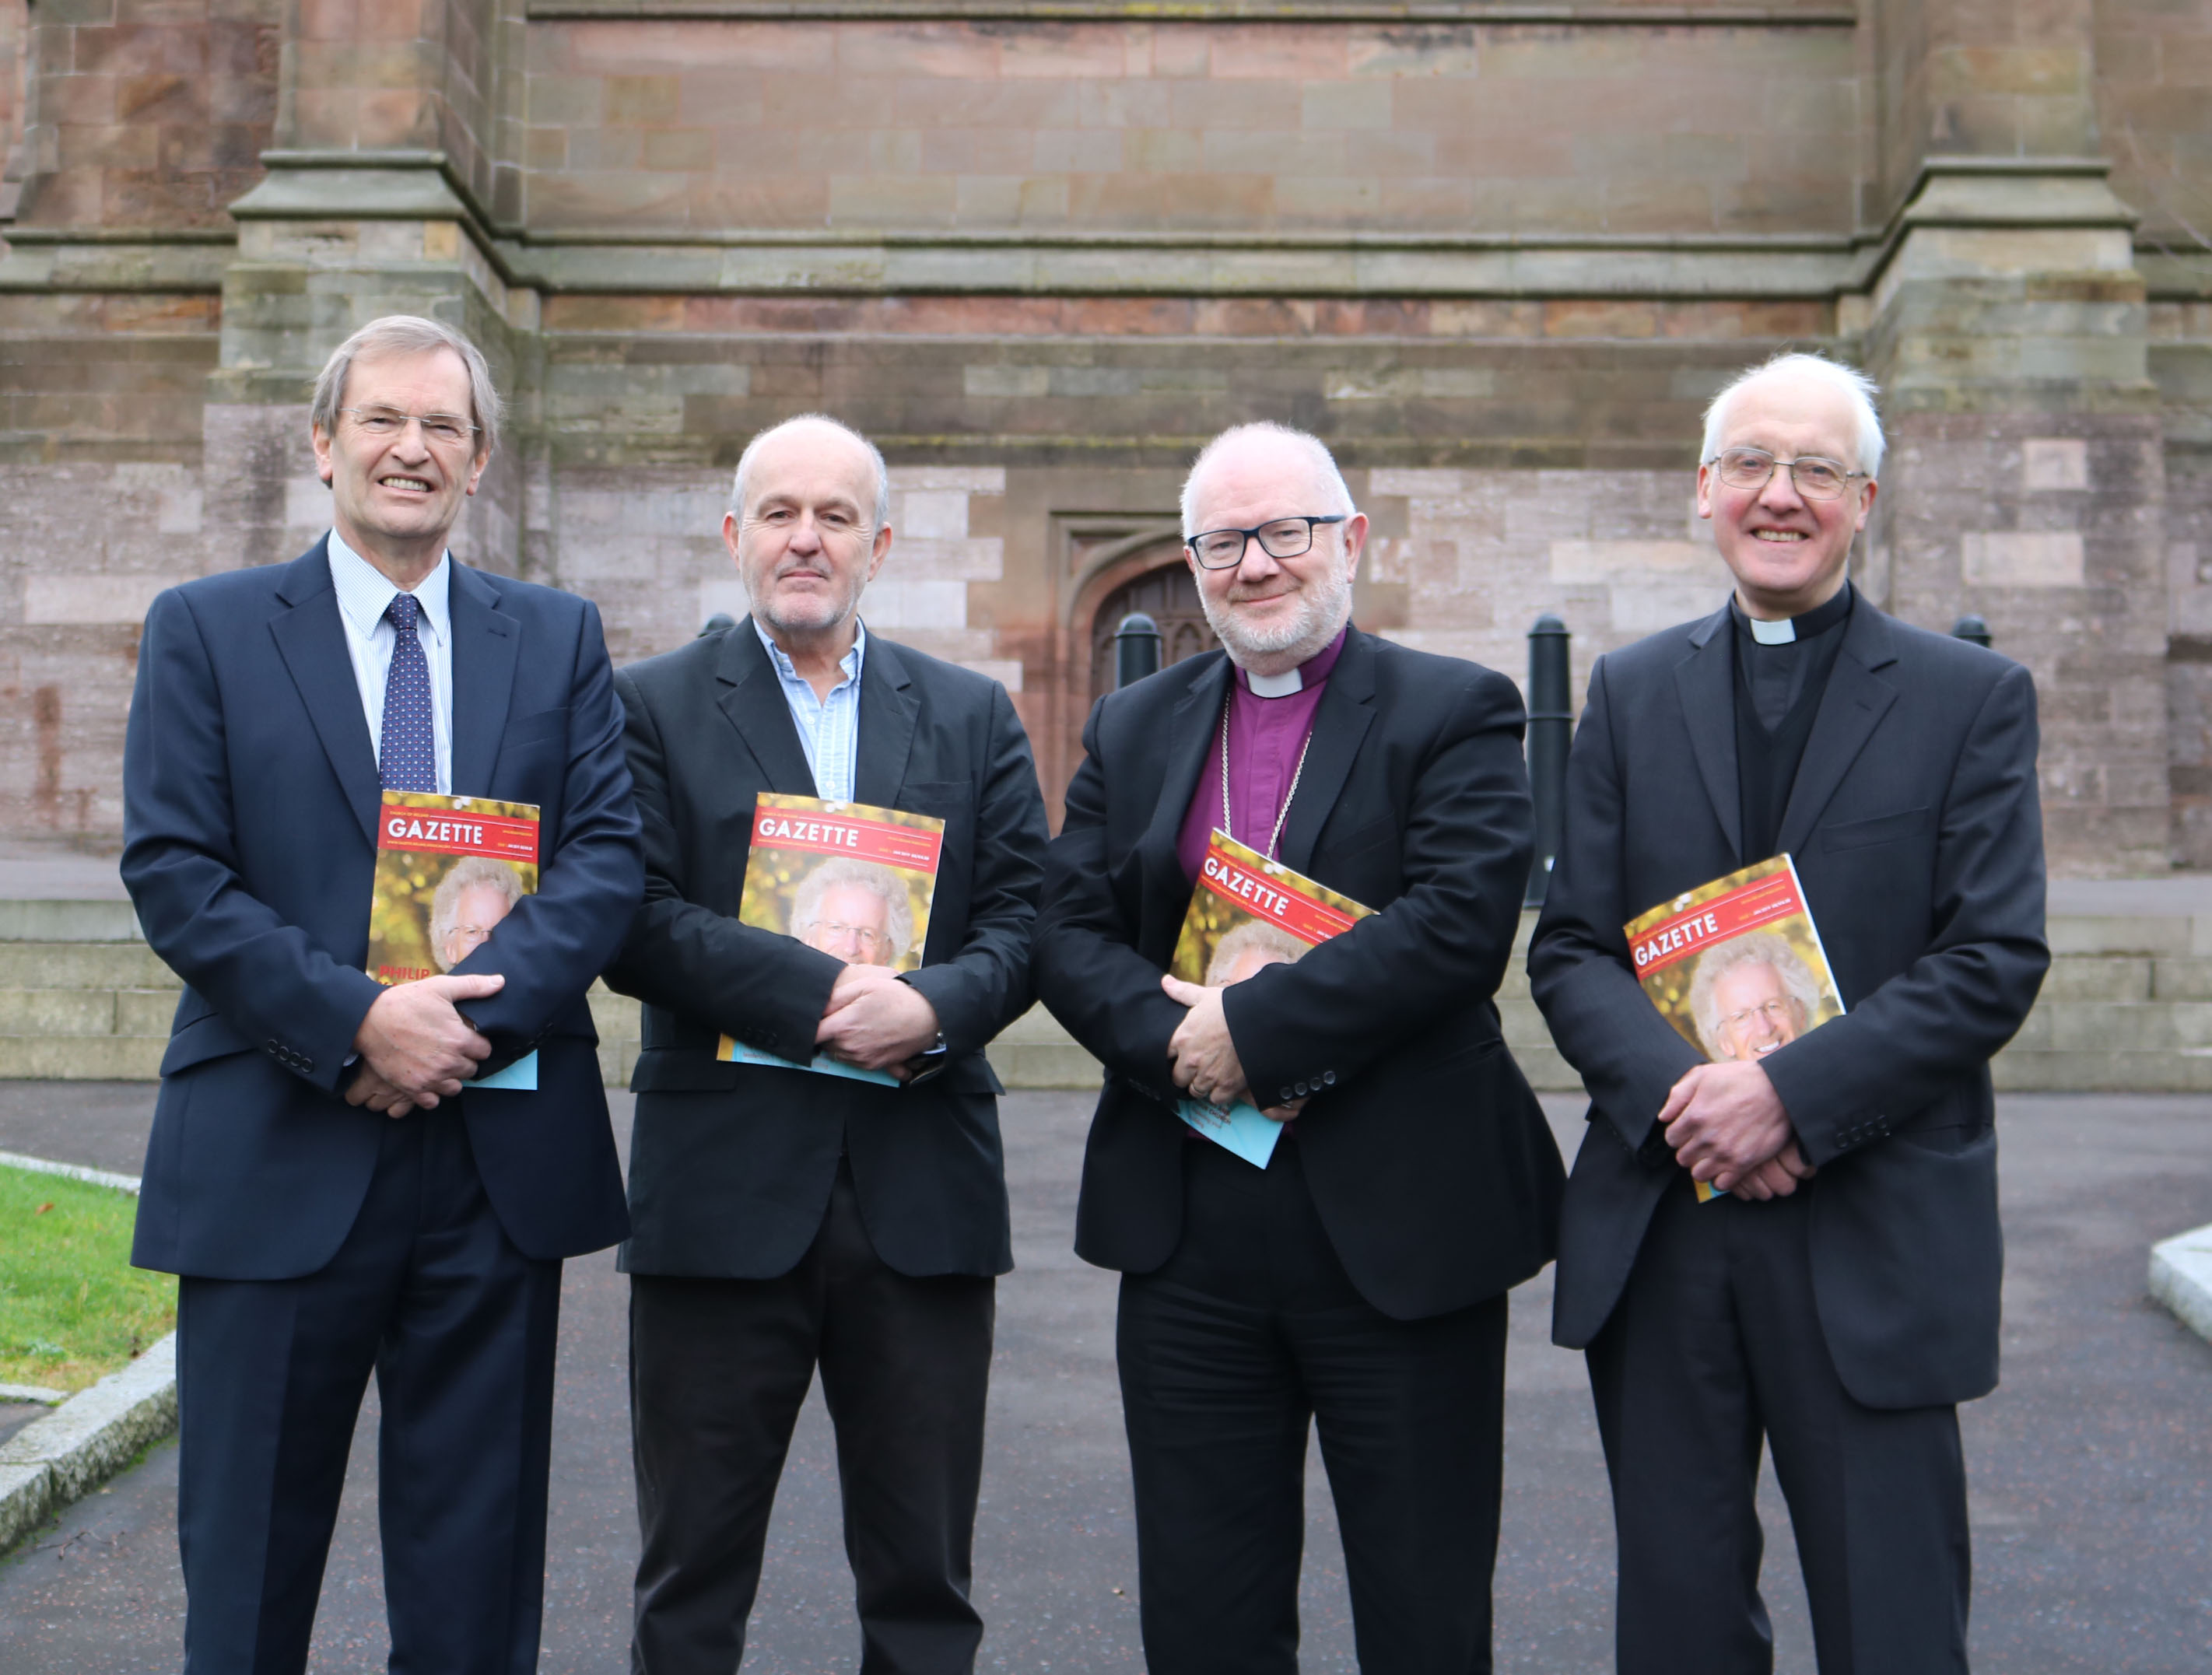 The new monthly format of the Church of Ireland Gazette has been launched at St Patrick's Cathedral, Armagh.  Pictured at the launch are Adrian Clements, chair of the Gazette's publishers, Church of Ireland Press Ltd; the Revd Earl Storey, Gazette editor; the Archbishop of Armagh, the Most Revd Dr Richard Clarke; and the Dean of Armagh, the Very Revd Gregory Dunstan.